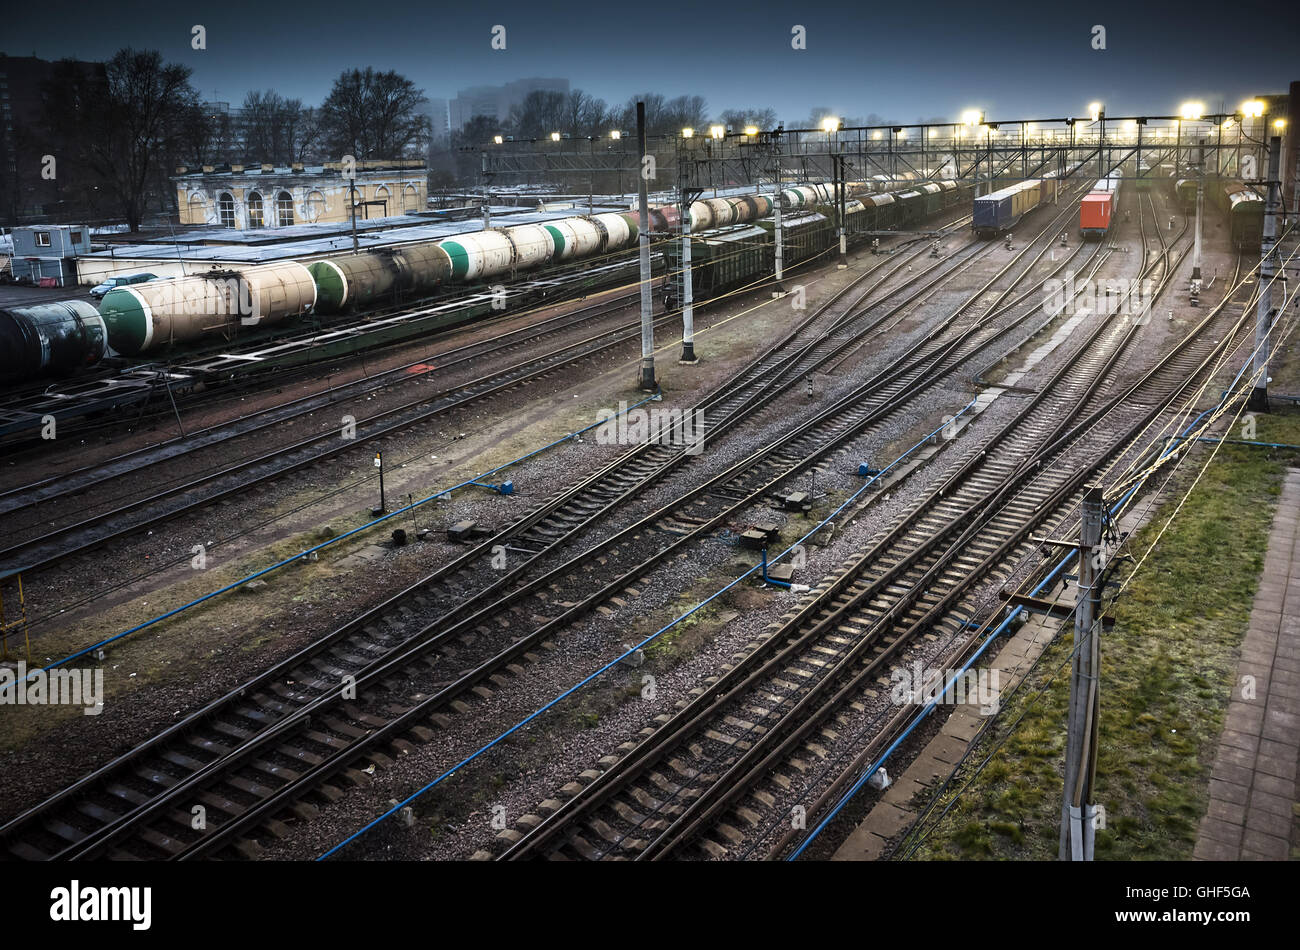 Sorting railway station with cargo trains on rails at night Stock Photo